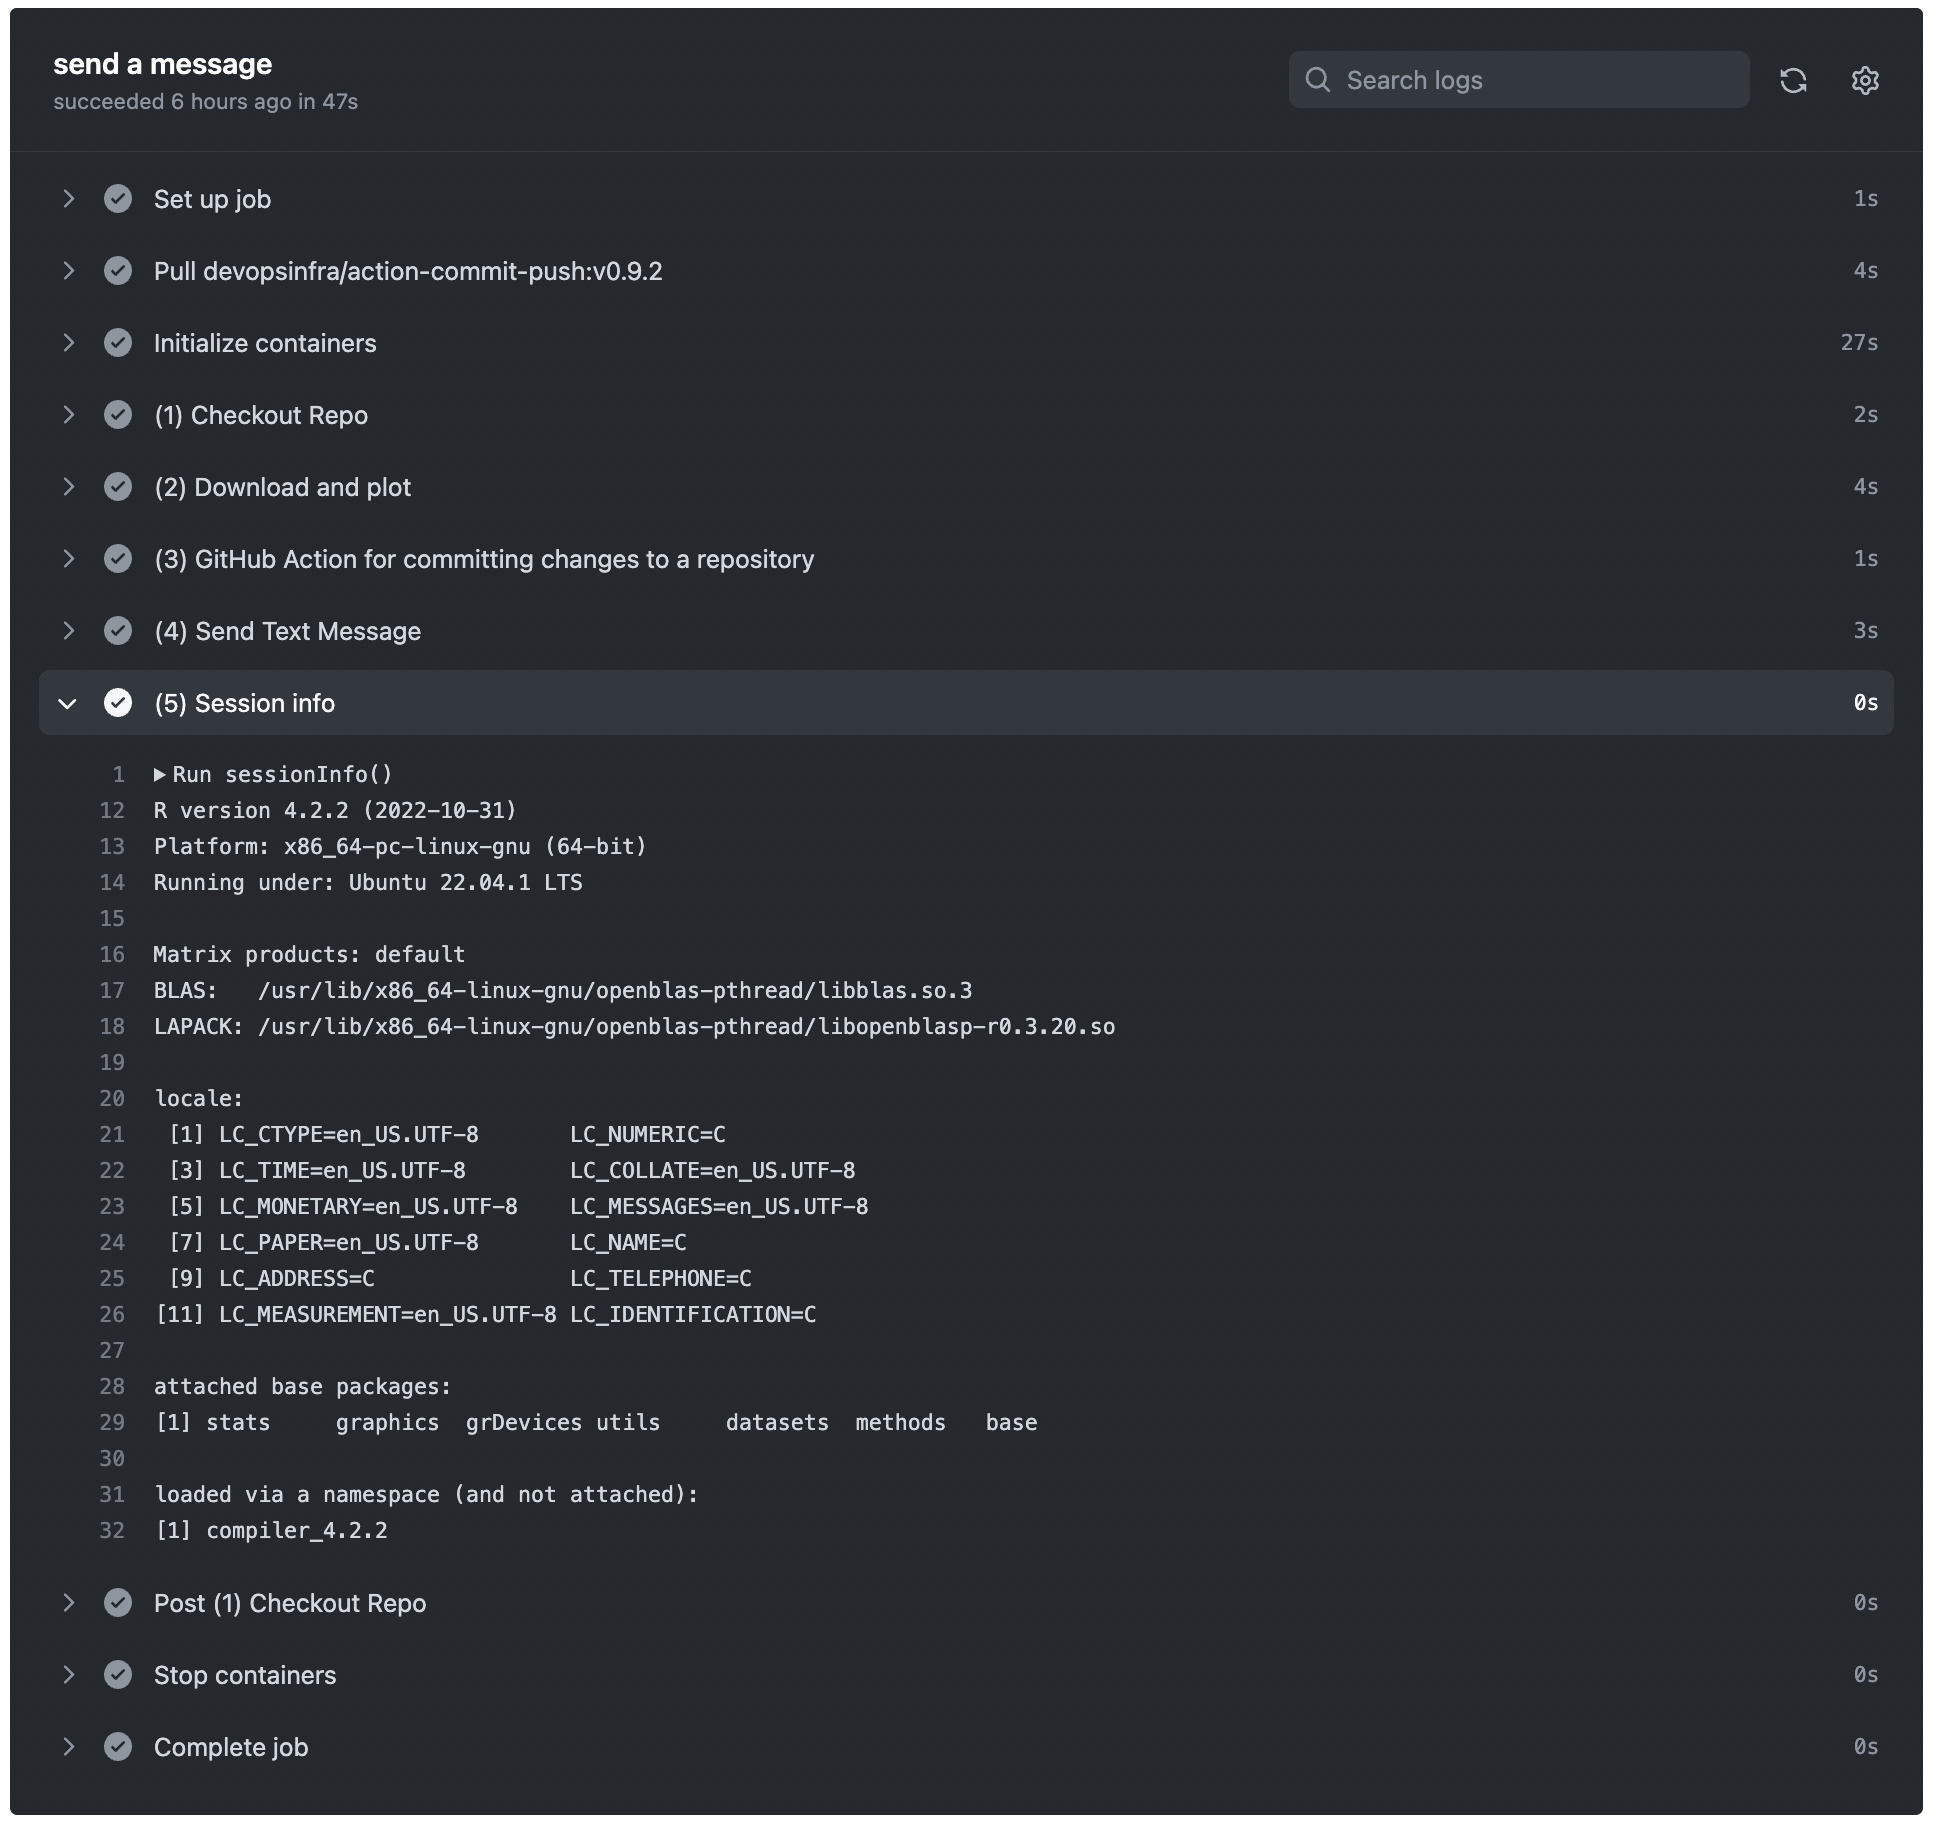 Screenshot of SessionInfo as part of a Github Action workflow task.